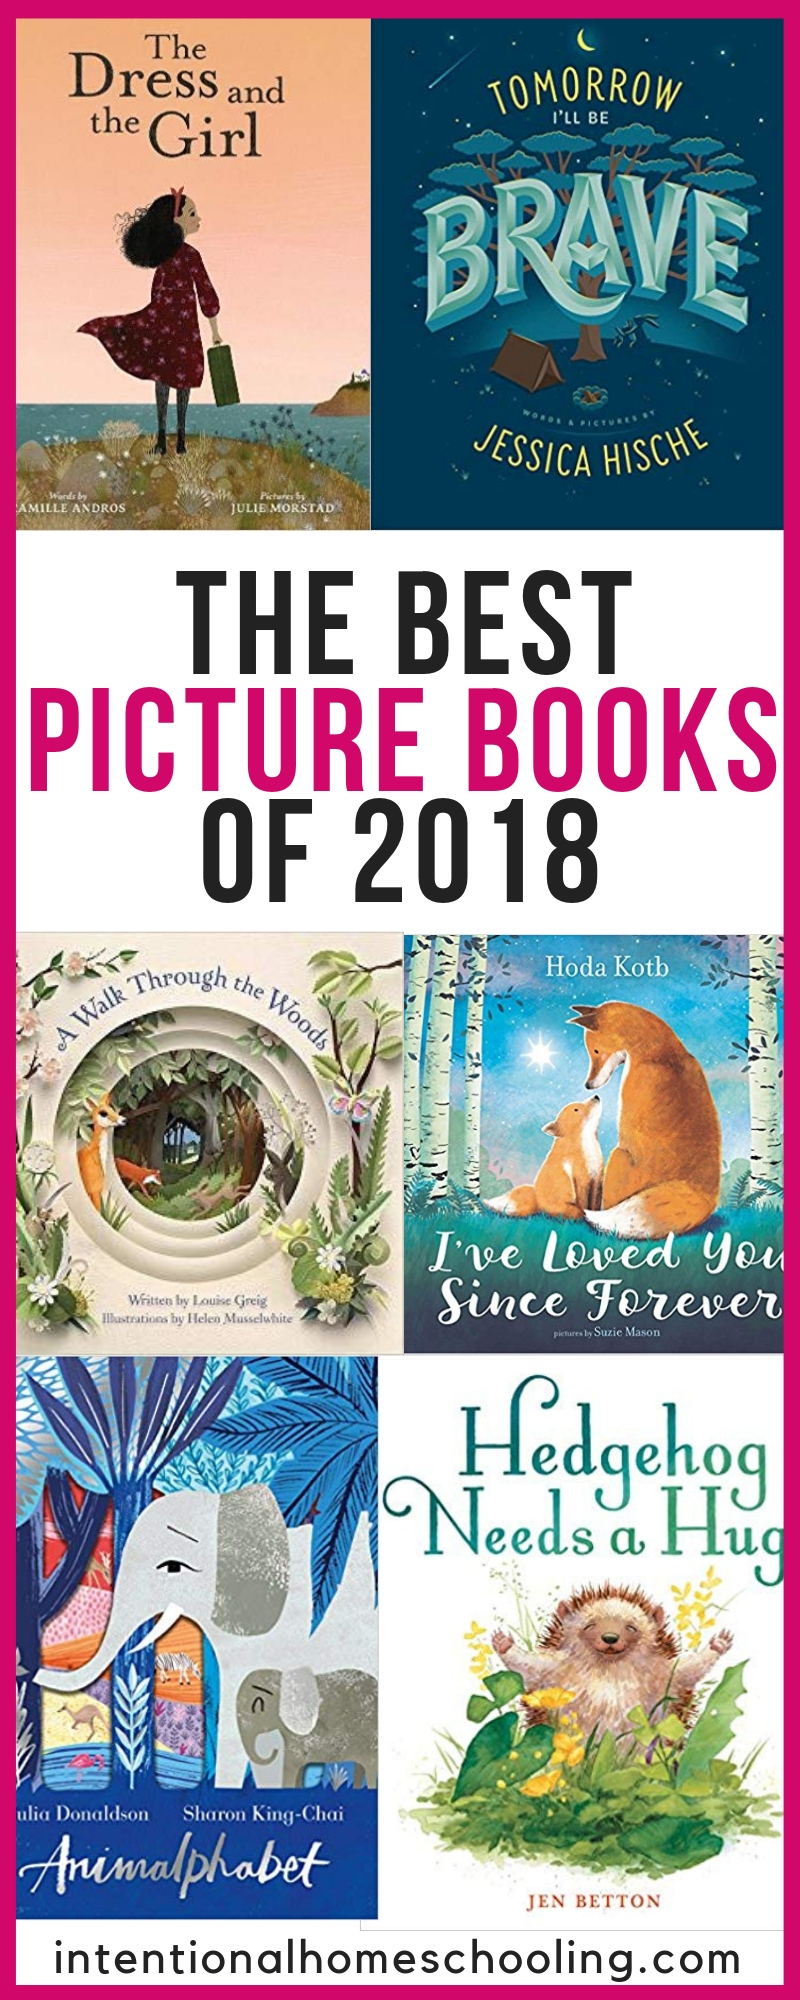 The Best Picture Books of 2018 - our favorite picture books published in 2018